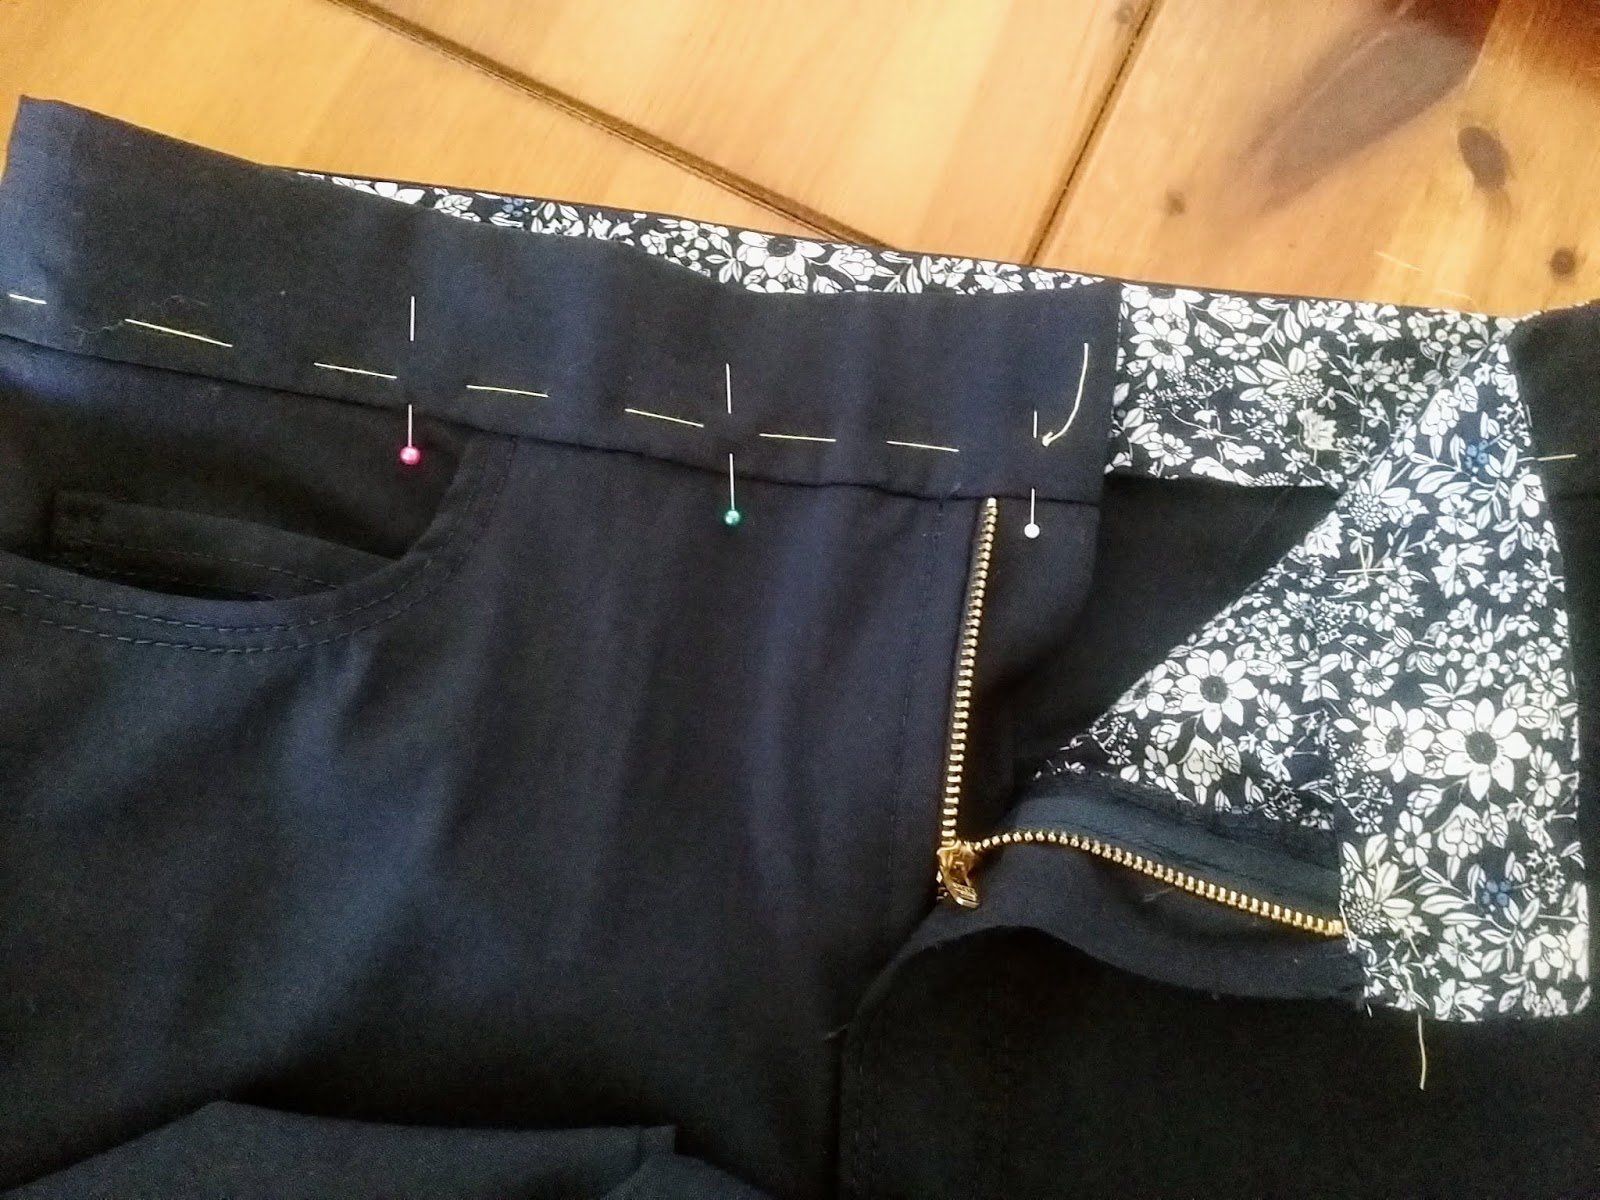 How to sew Jeans